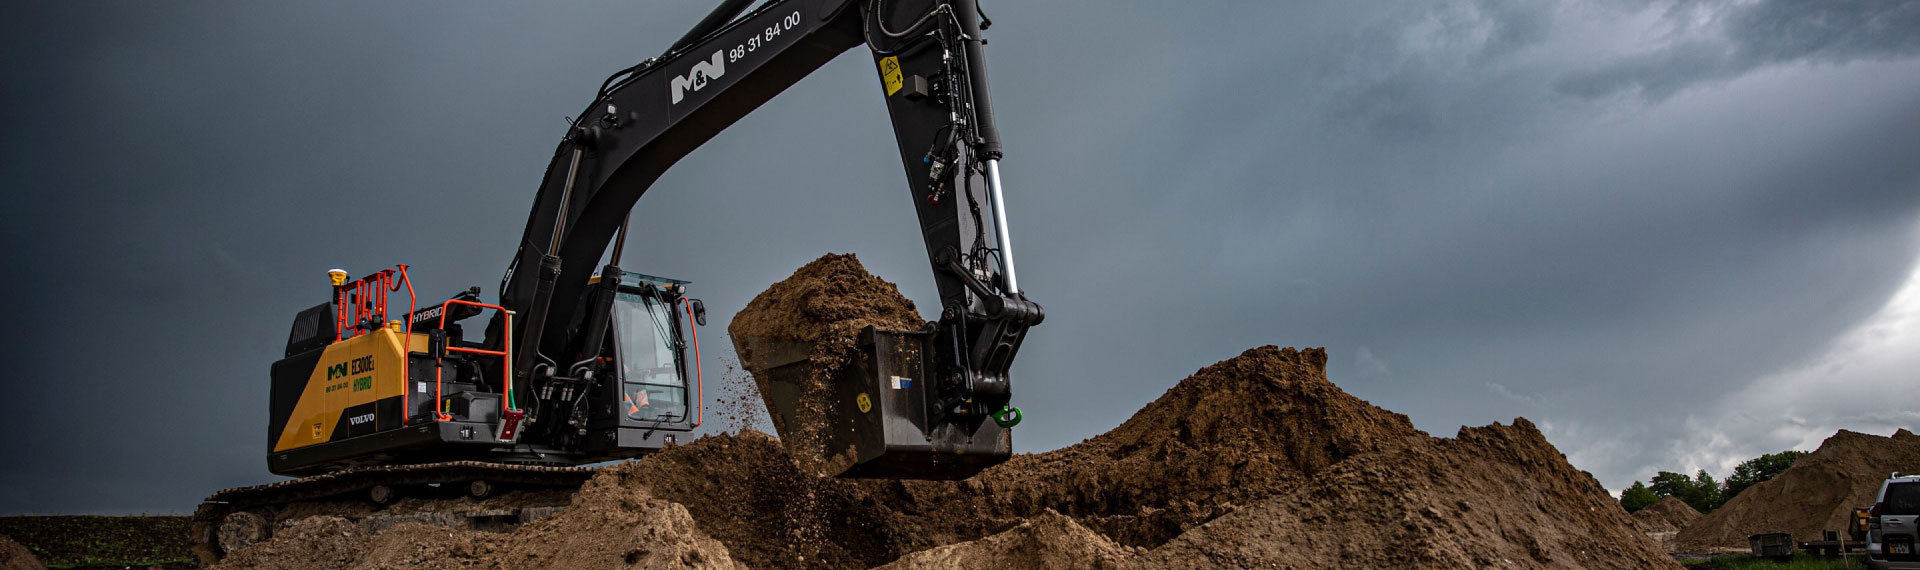 A strong yet lightweight excavator bucket made in Hardox® 500 Tuf steel, digging in the dirt.